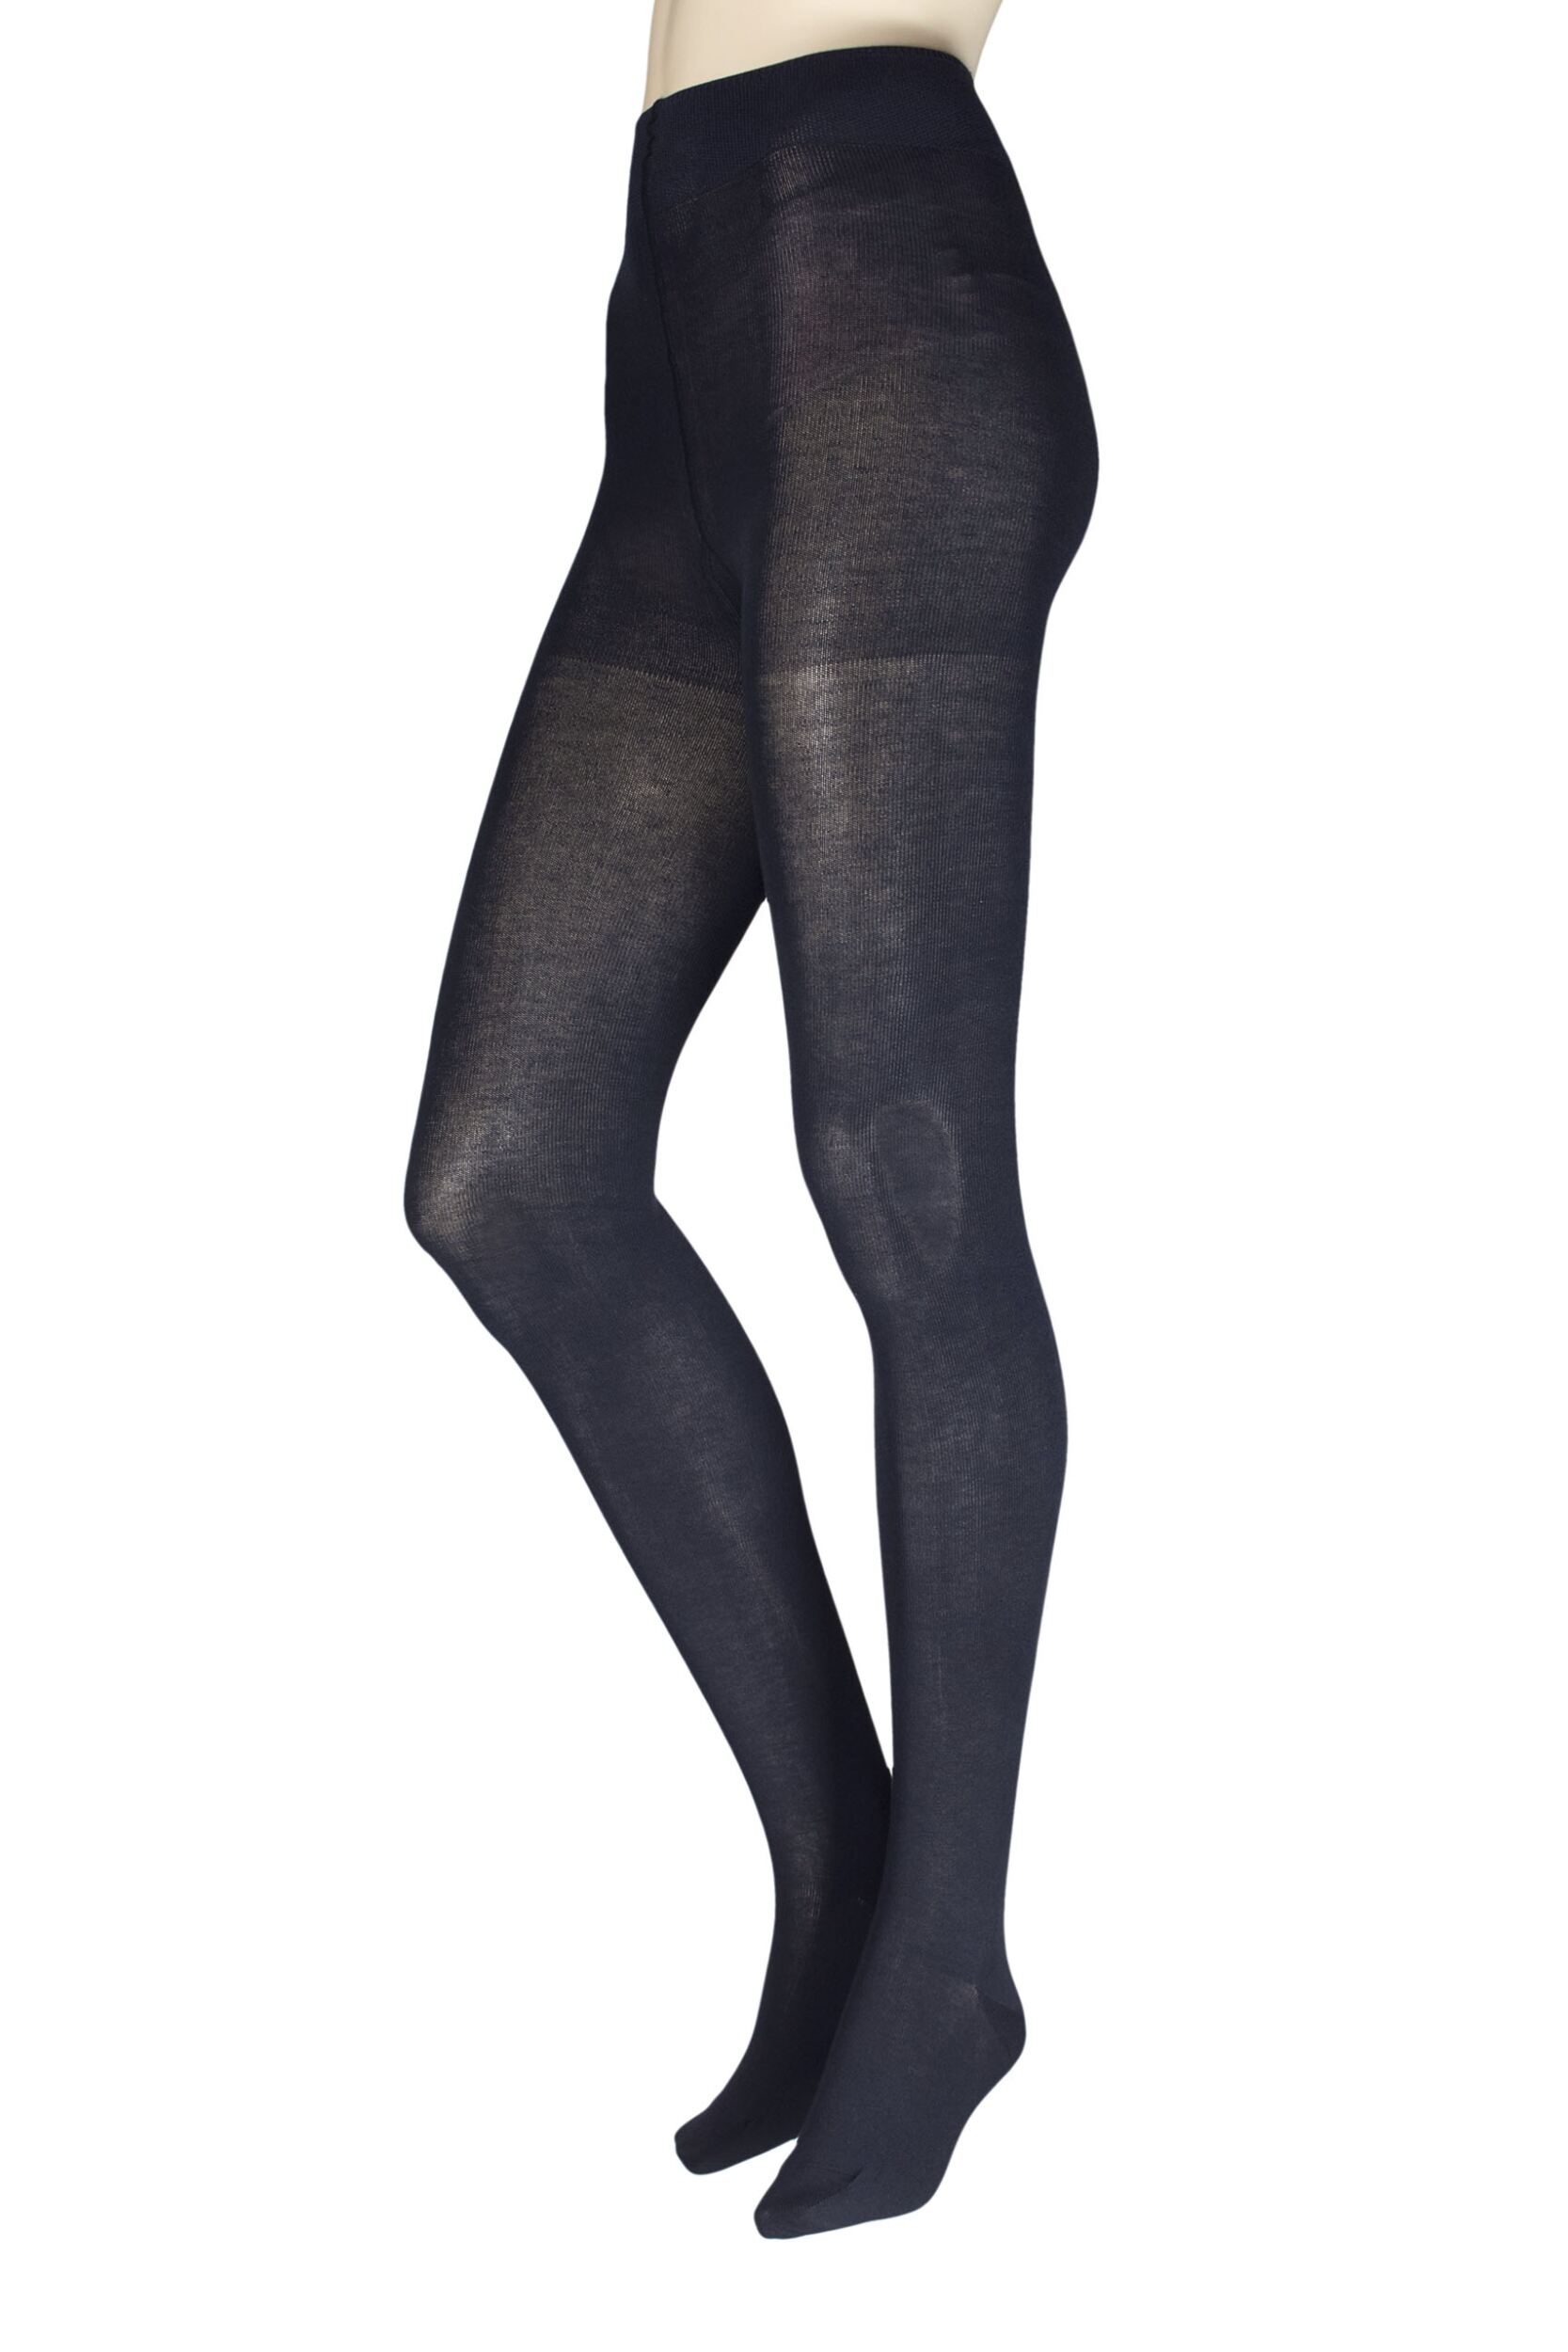 Ladies 1 Pair Falke Family Combed Cotton Tights Dark Navy Extra Large